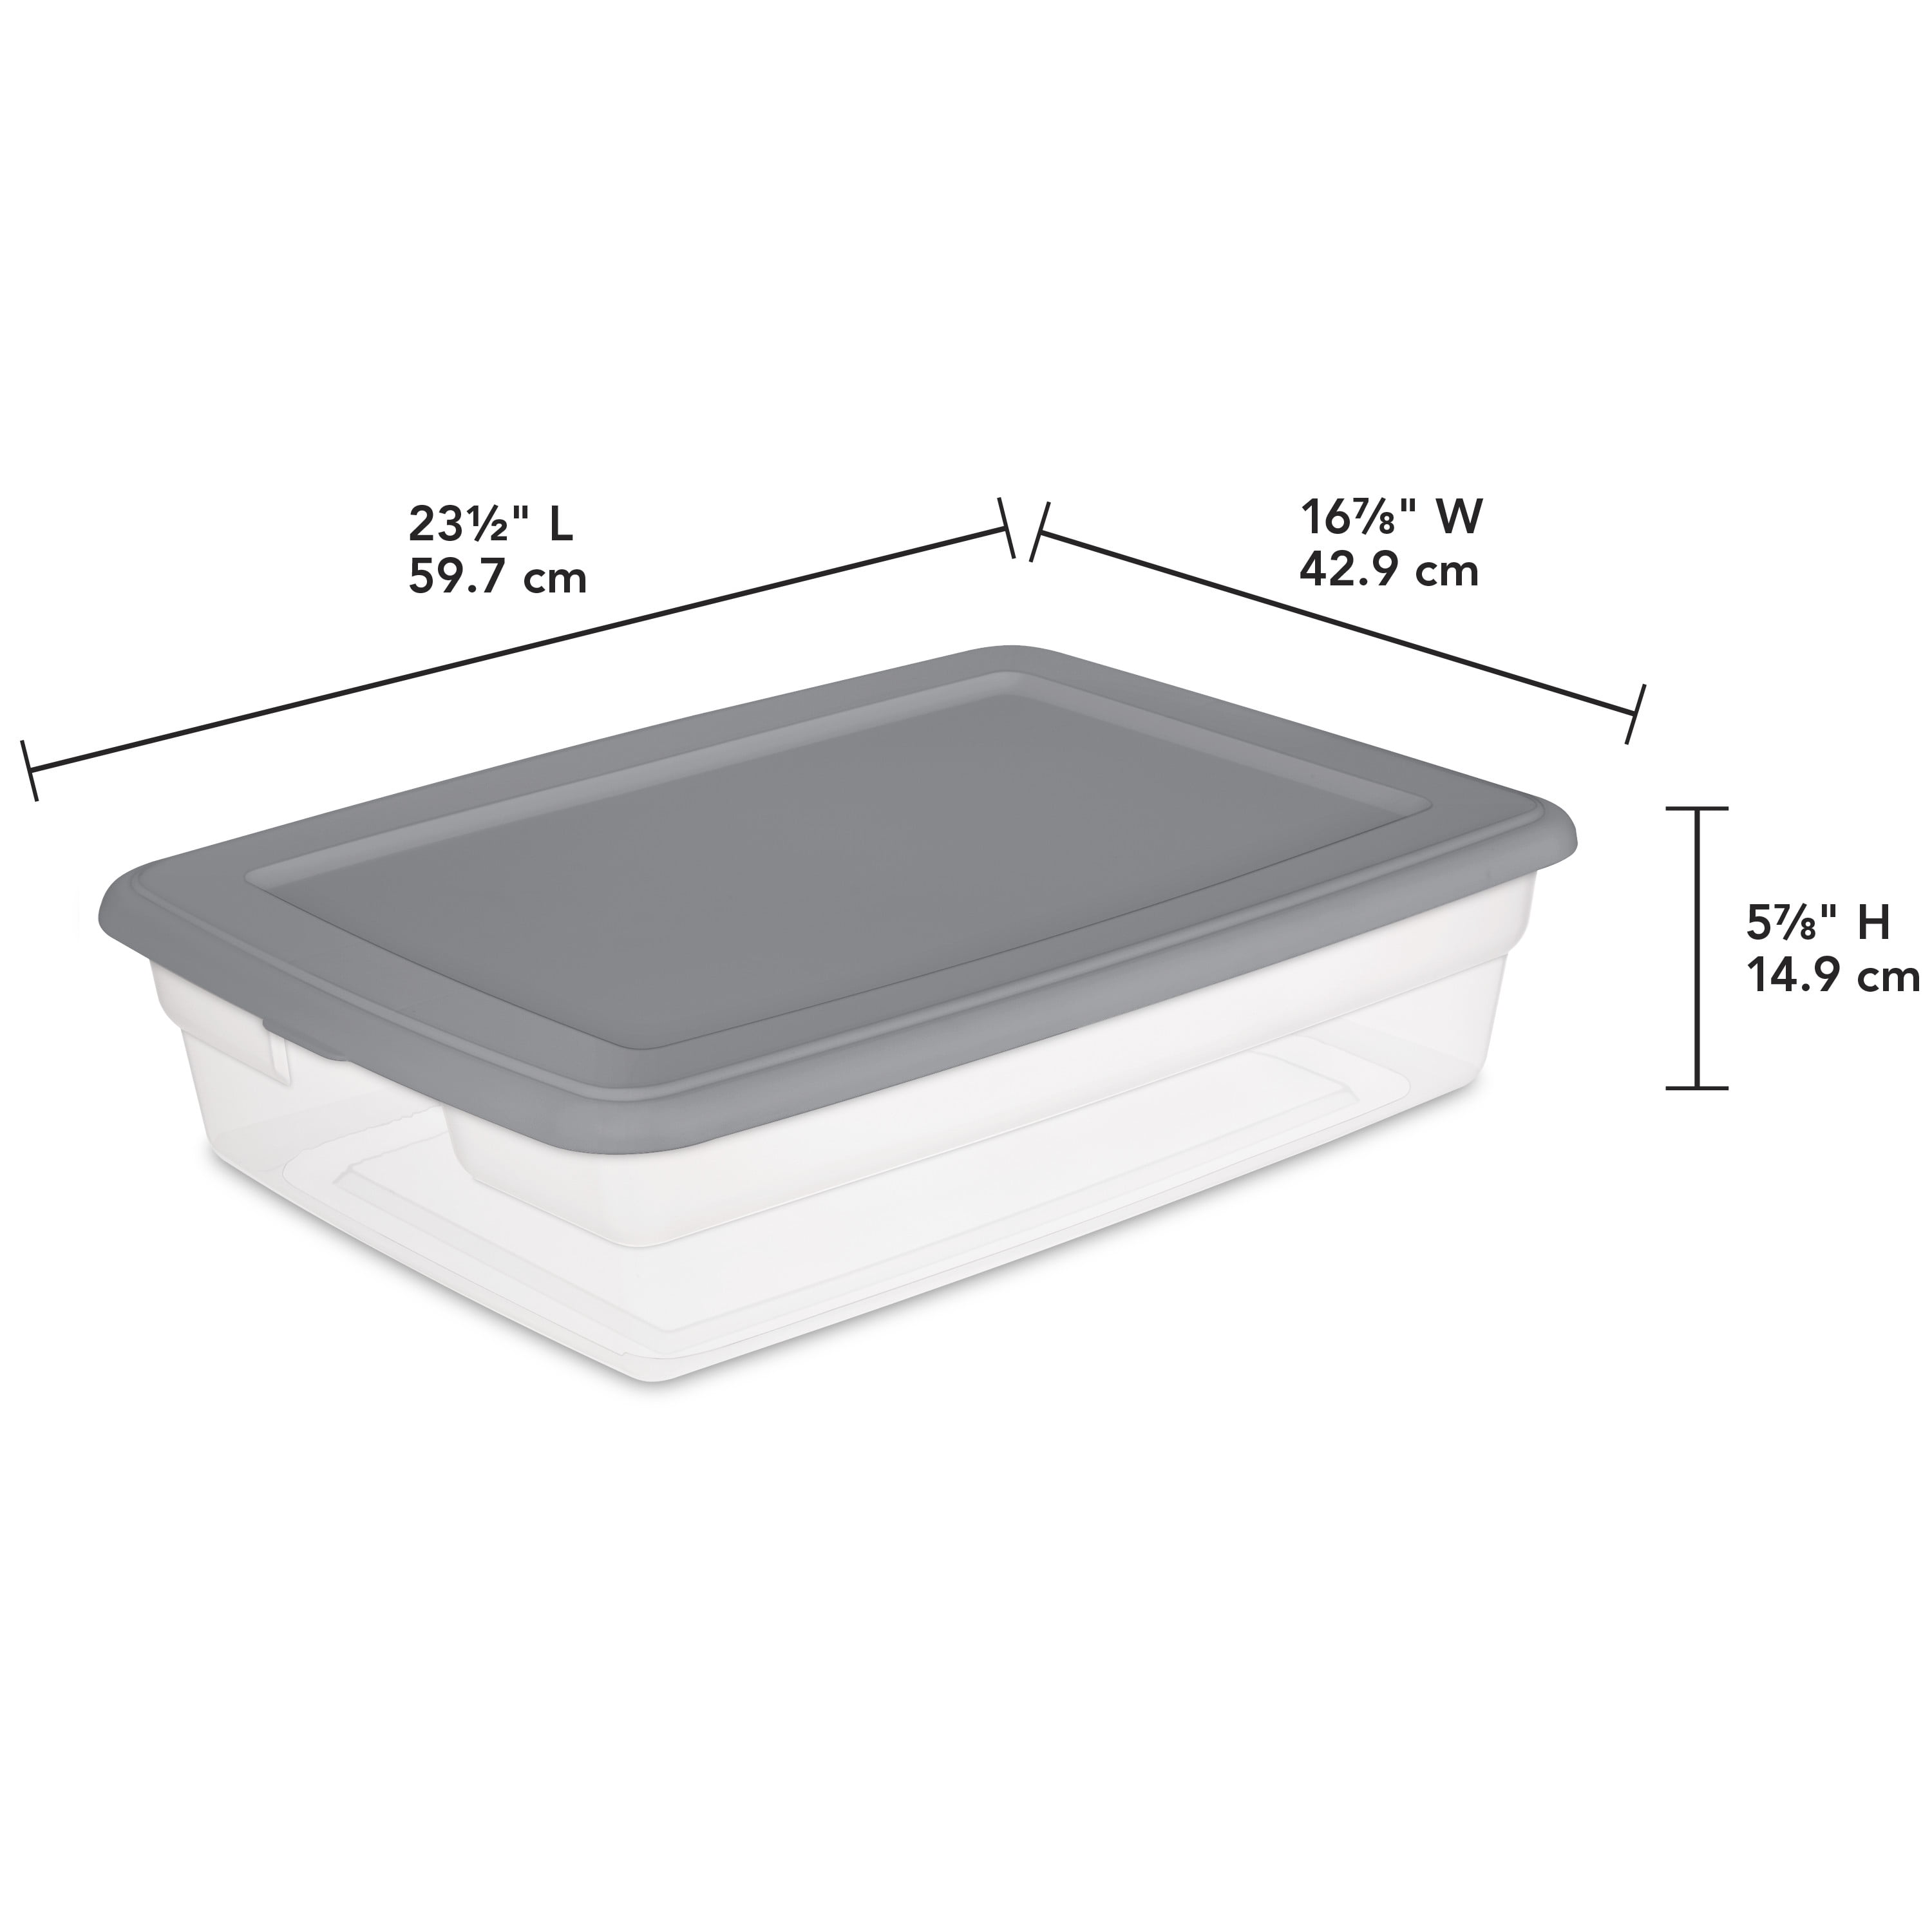 13-Pack Glass Storage Containers with Lids (3 shapes, 13 sizes